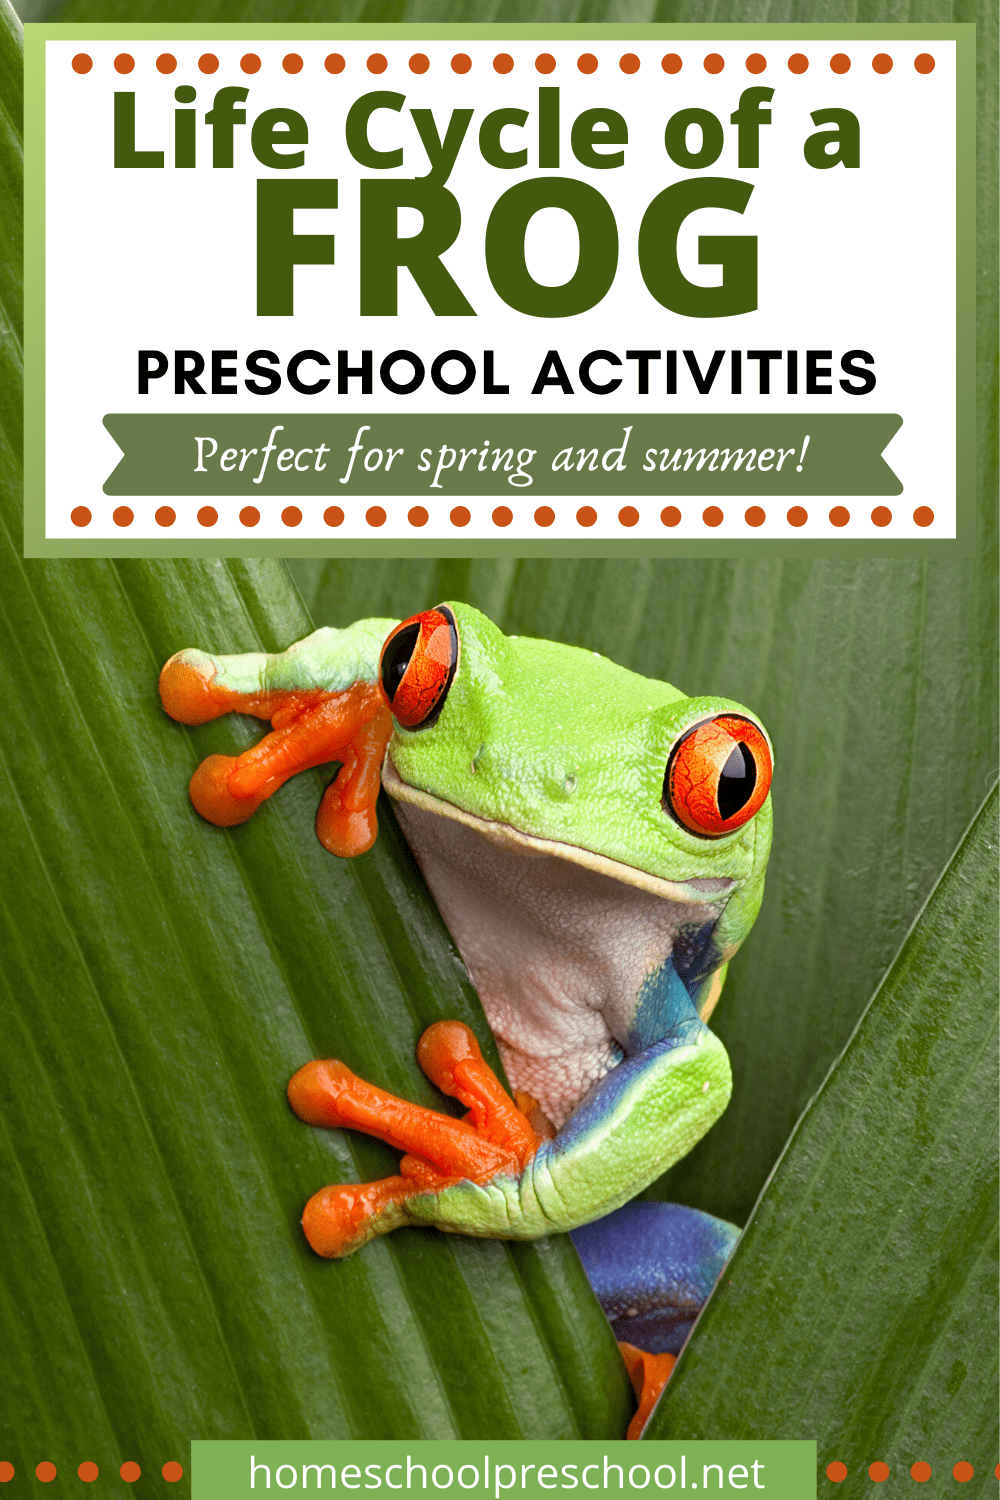 This collection of frog life cycle activities contains both crafts and worksheets that will help you demonstrate how frogs grow.